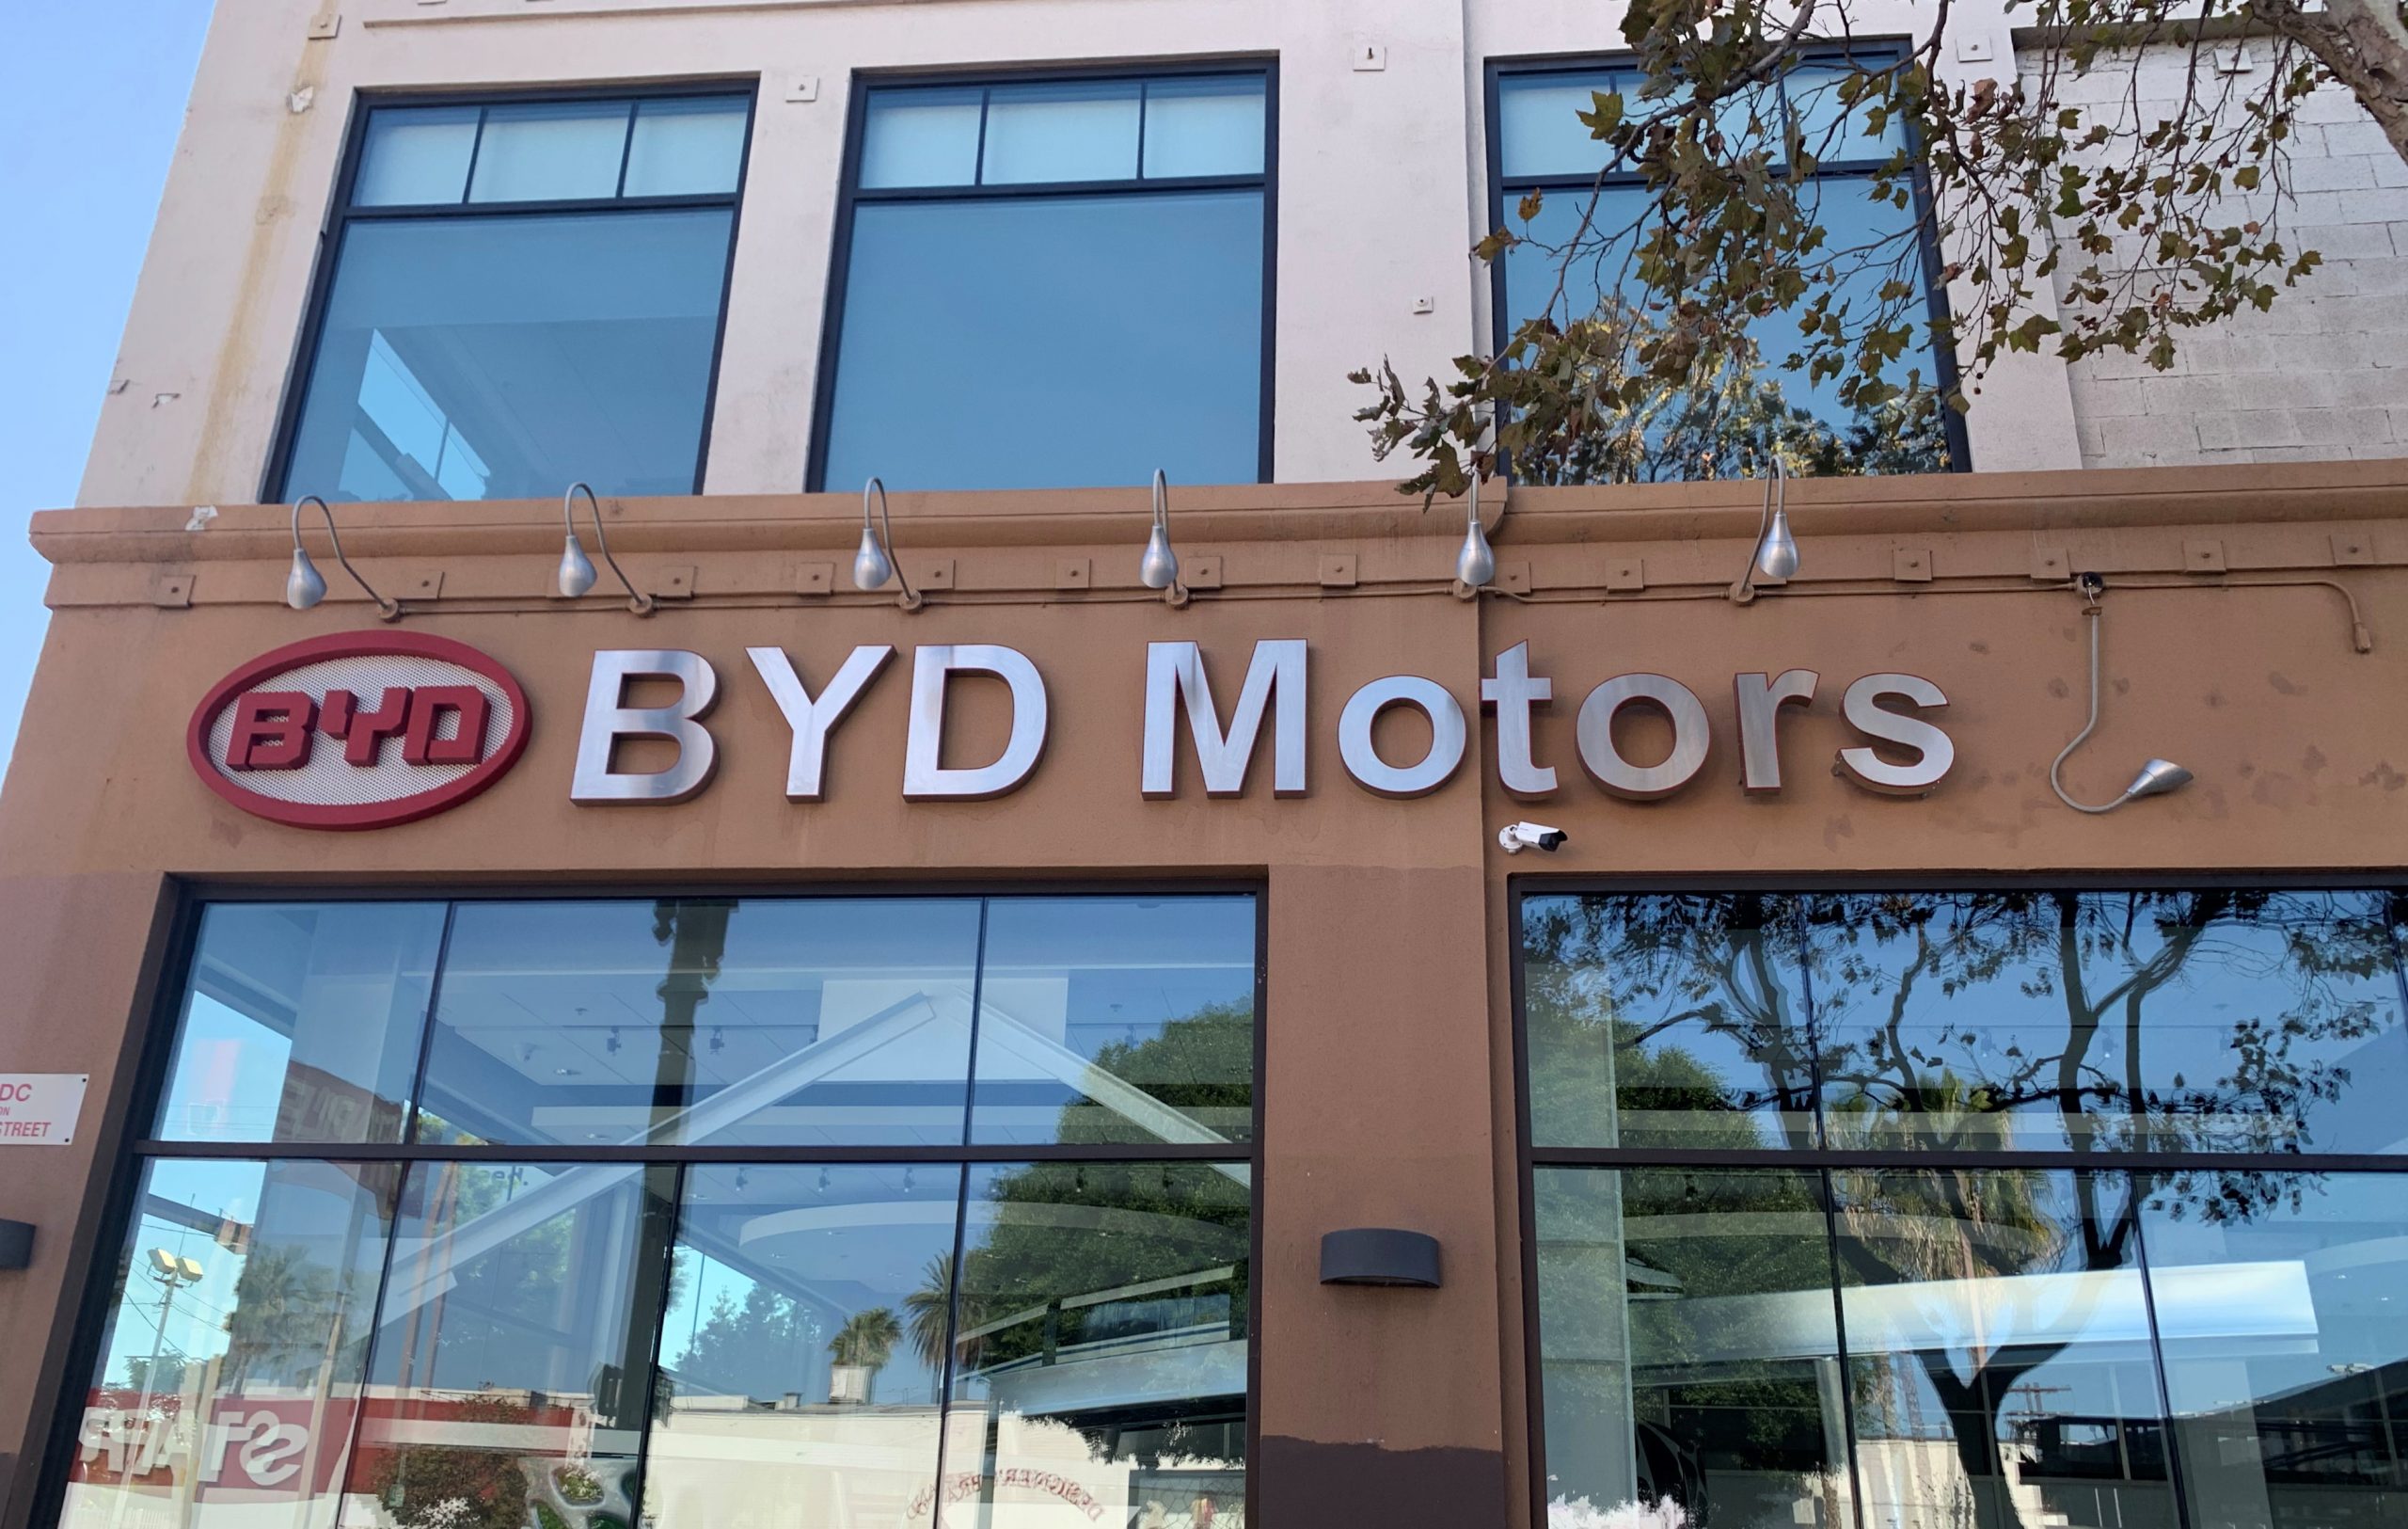 Convey simplicity, modernity and durability in an eye-catching way with steel dimensional letters. Like these ones for BYD Motors' Los Angeles branch.